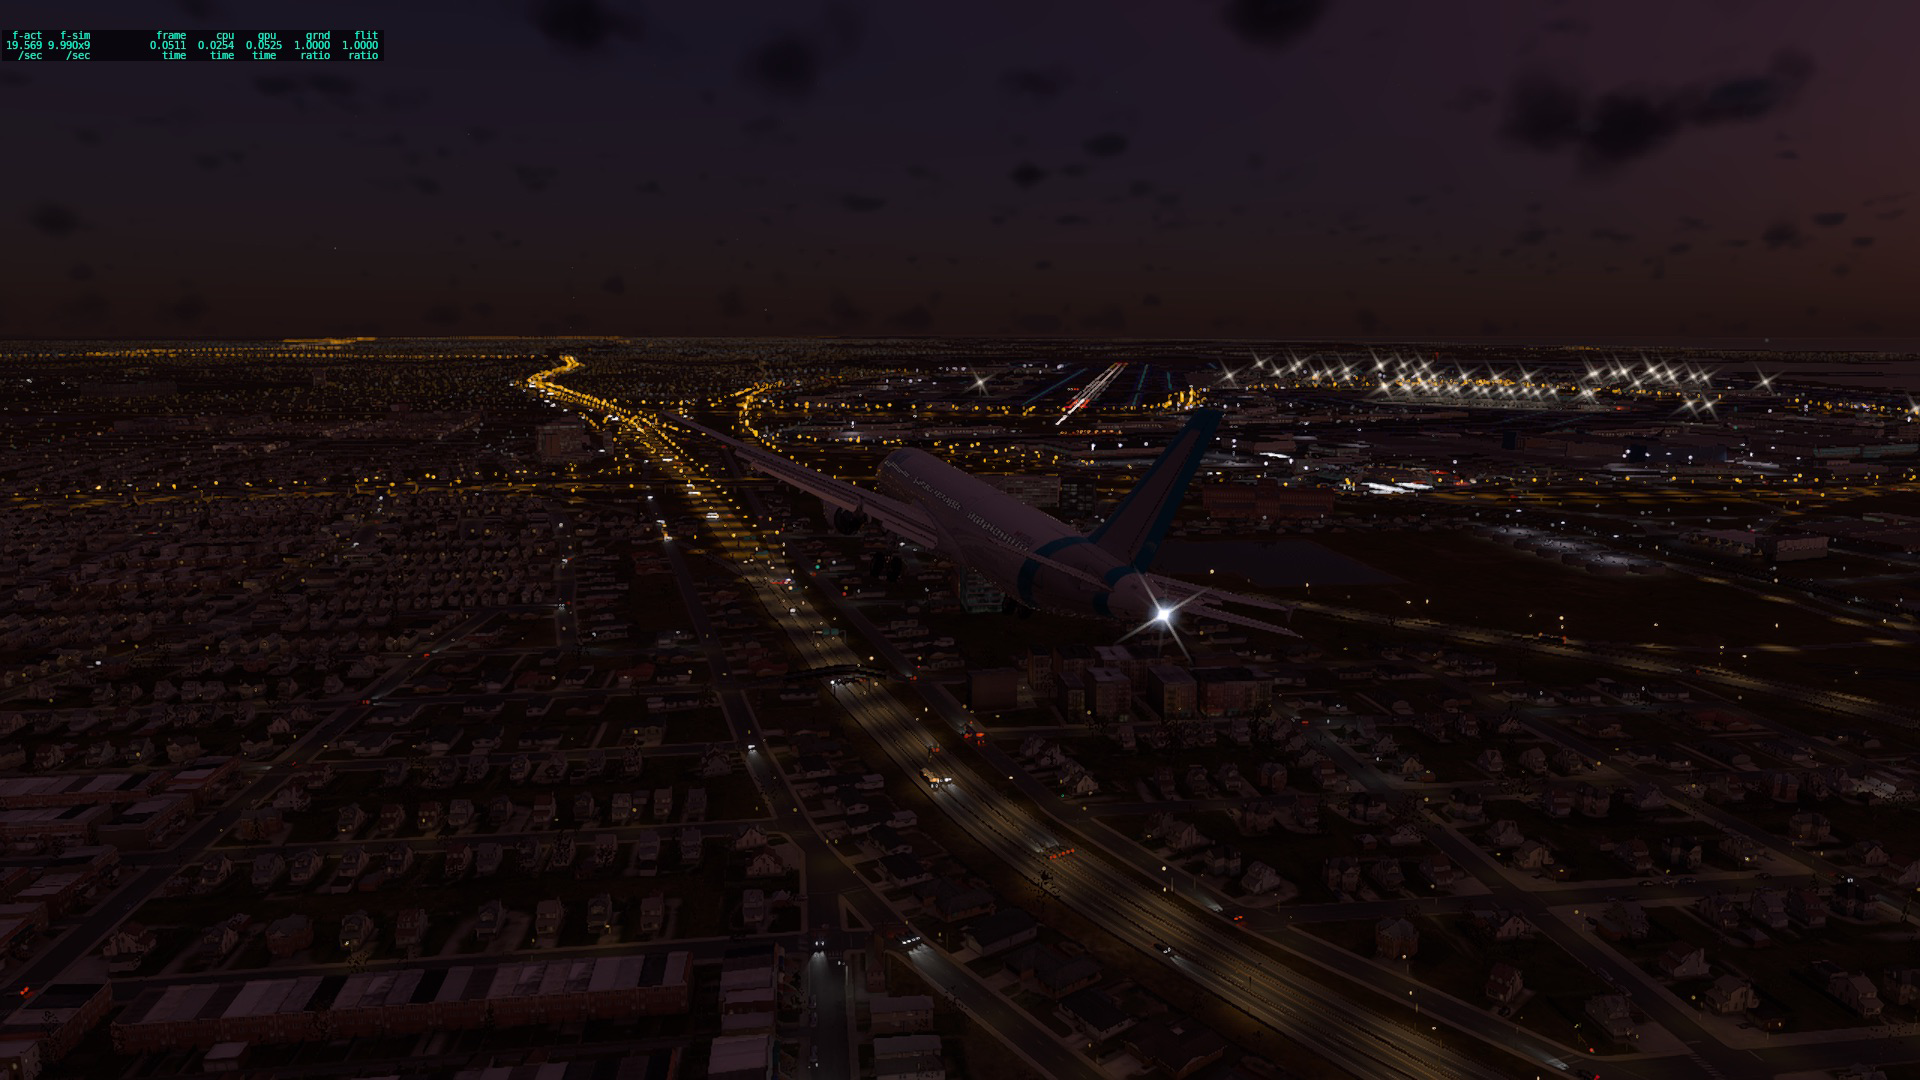 A321 on approach to KJFK 13L at night. Highways with cars, the street lights, and more all glow amber and white. The runway is visible and the jet is makiing a sharp turn for it.